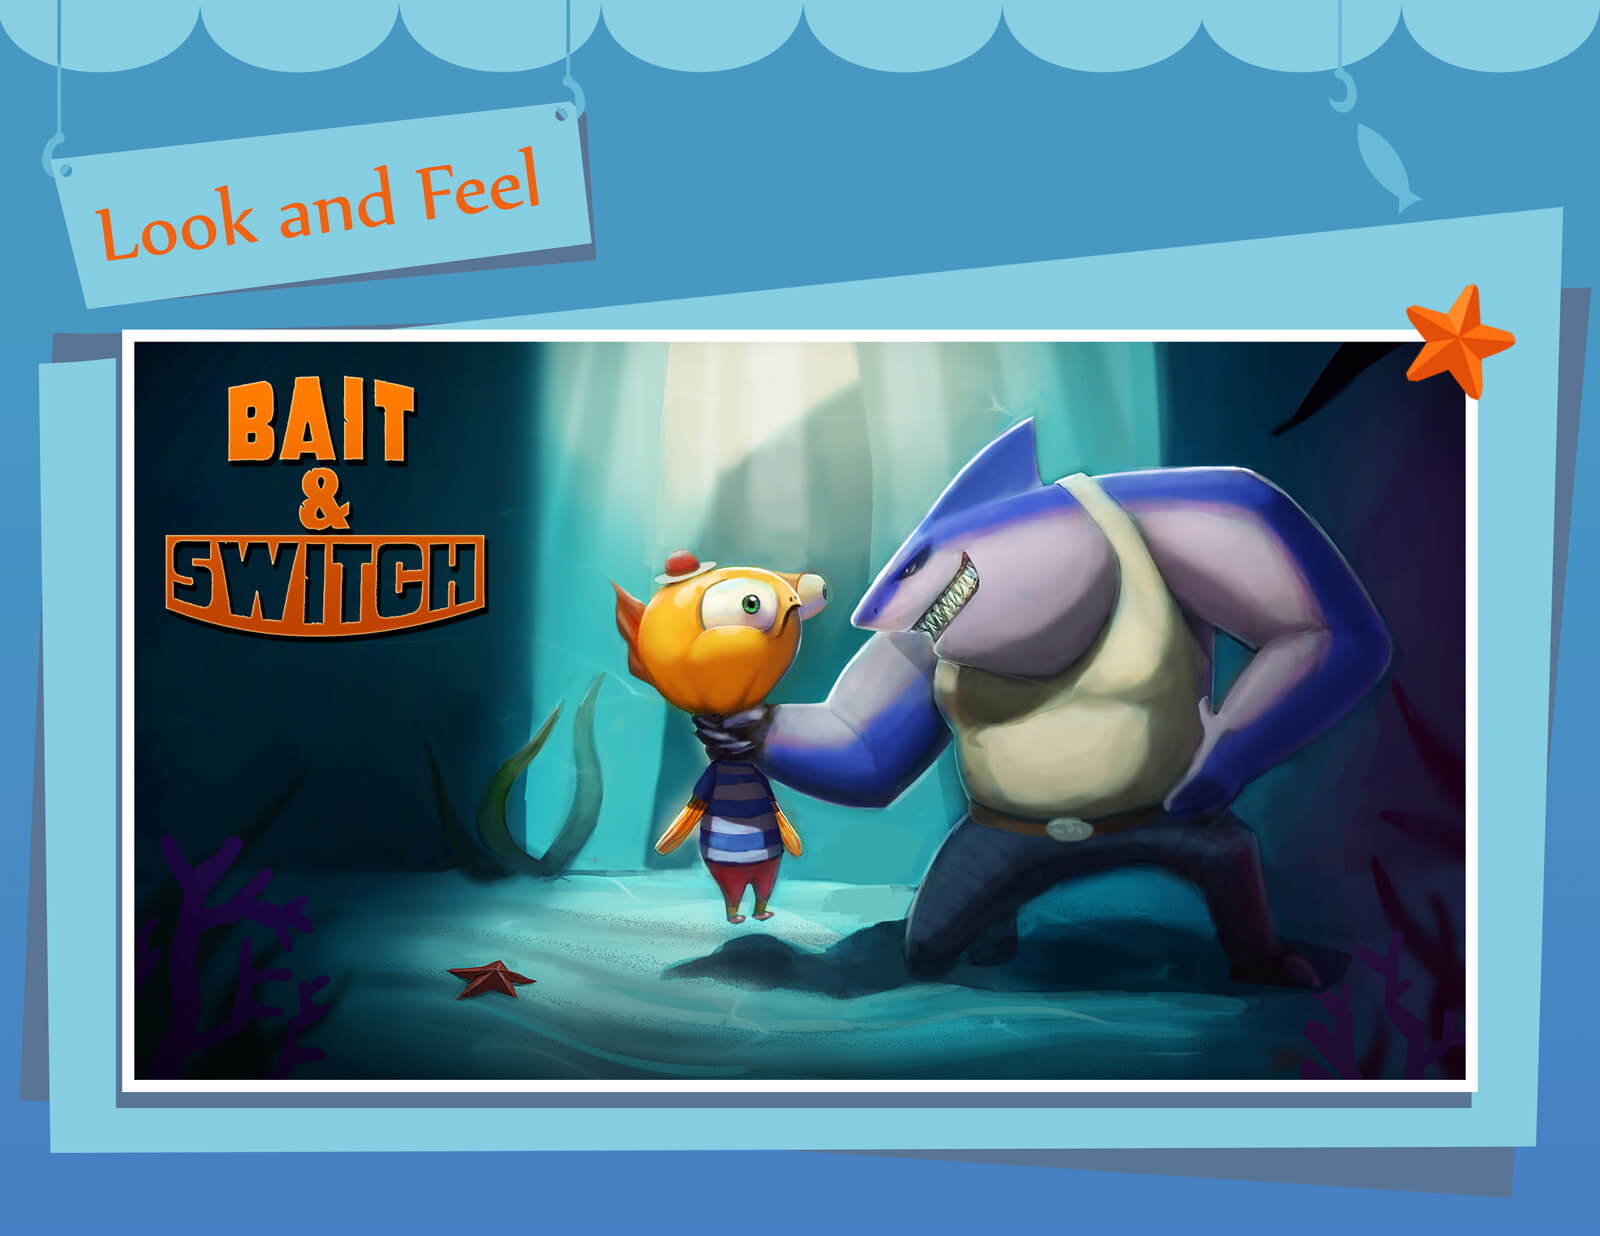 Look and Feel presentation slide for film Bait &amp; Switch depicting a large shark choking a small orange fish by the neck